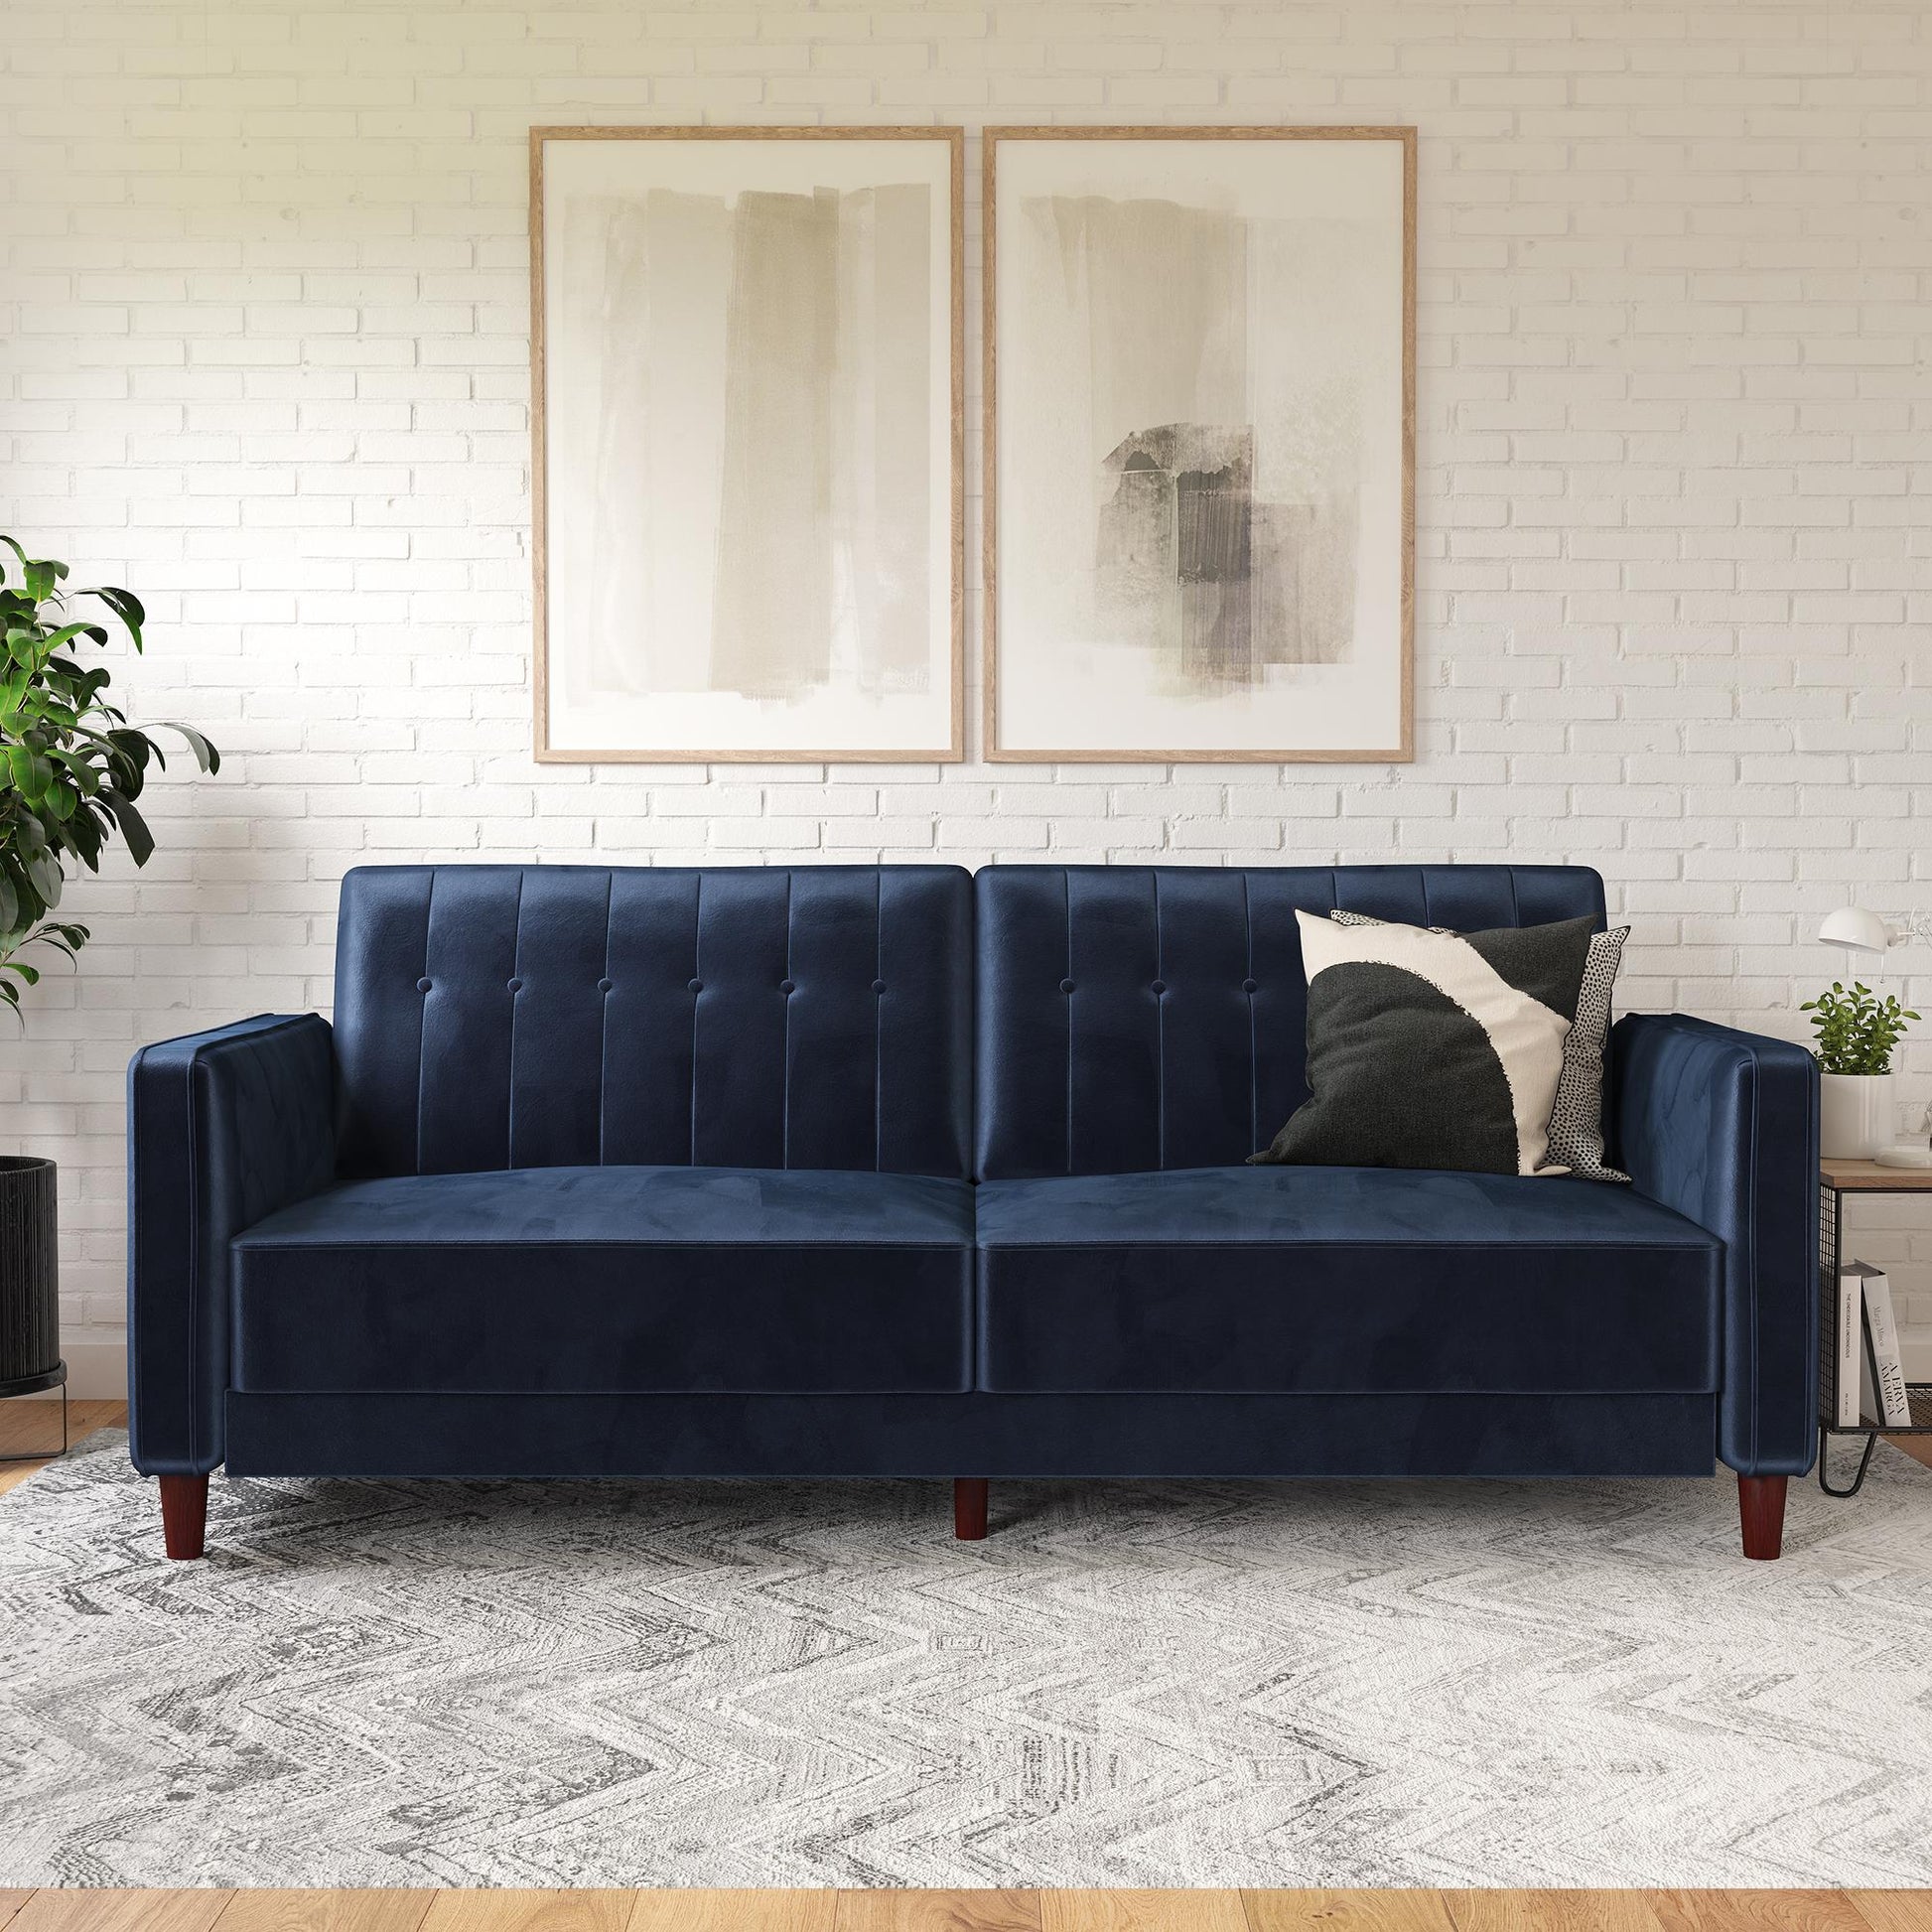 Pin Tufted Transitional Futon with Vertical Stitching and Button Tufting - Blue Velvet